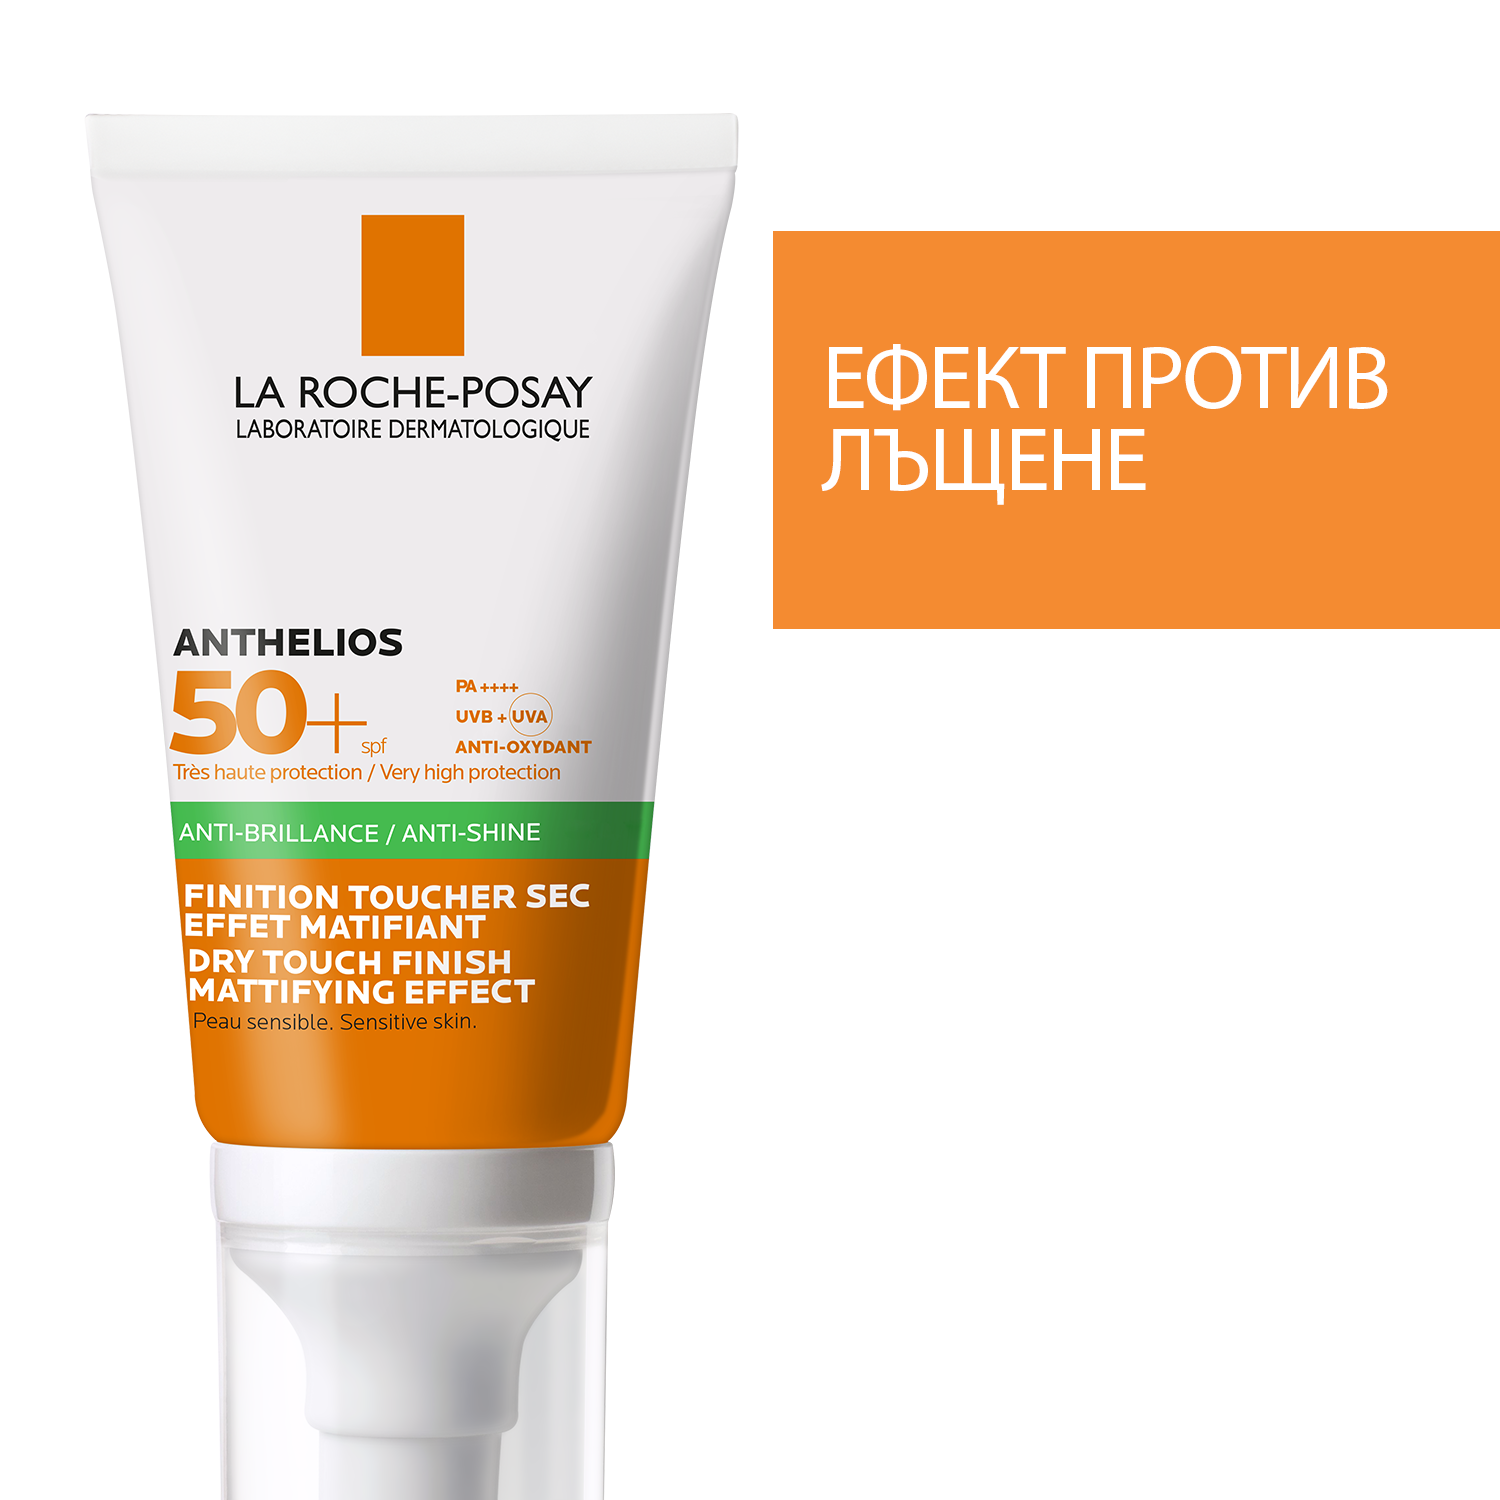 La Roche Posay ProductPage Sun Anthelios XL Dry Touch Gel Spf50 50ml F